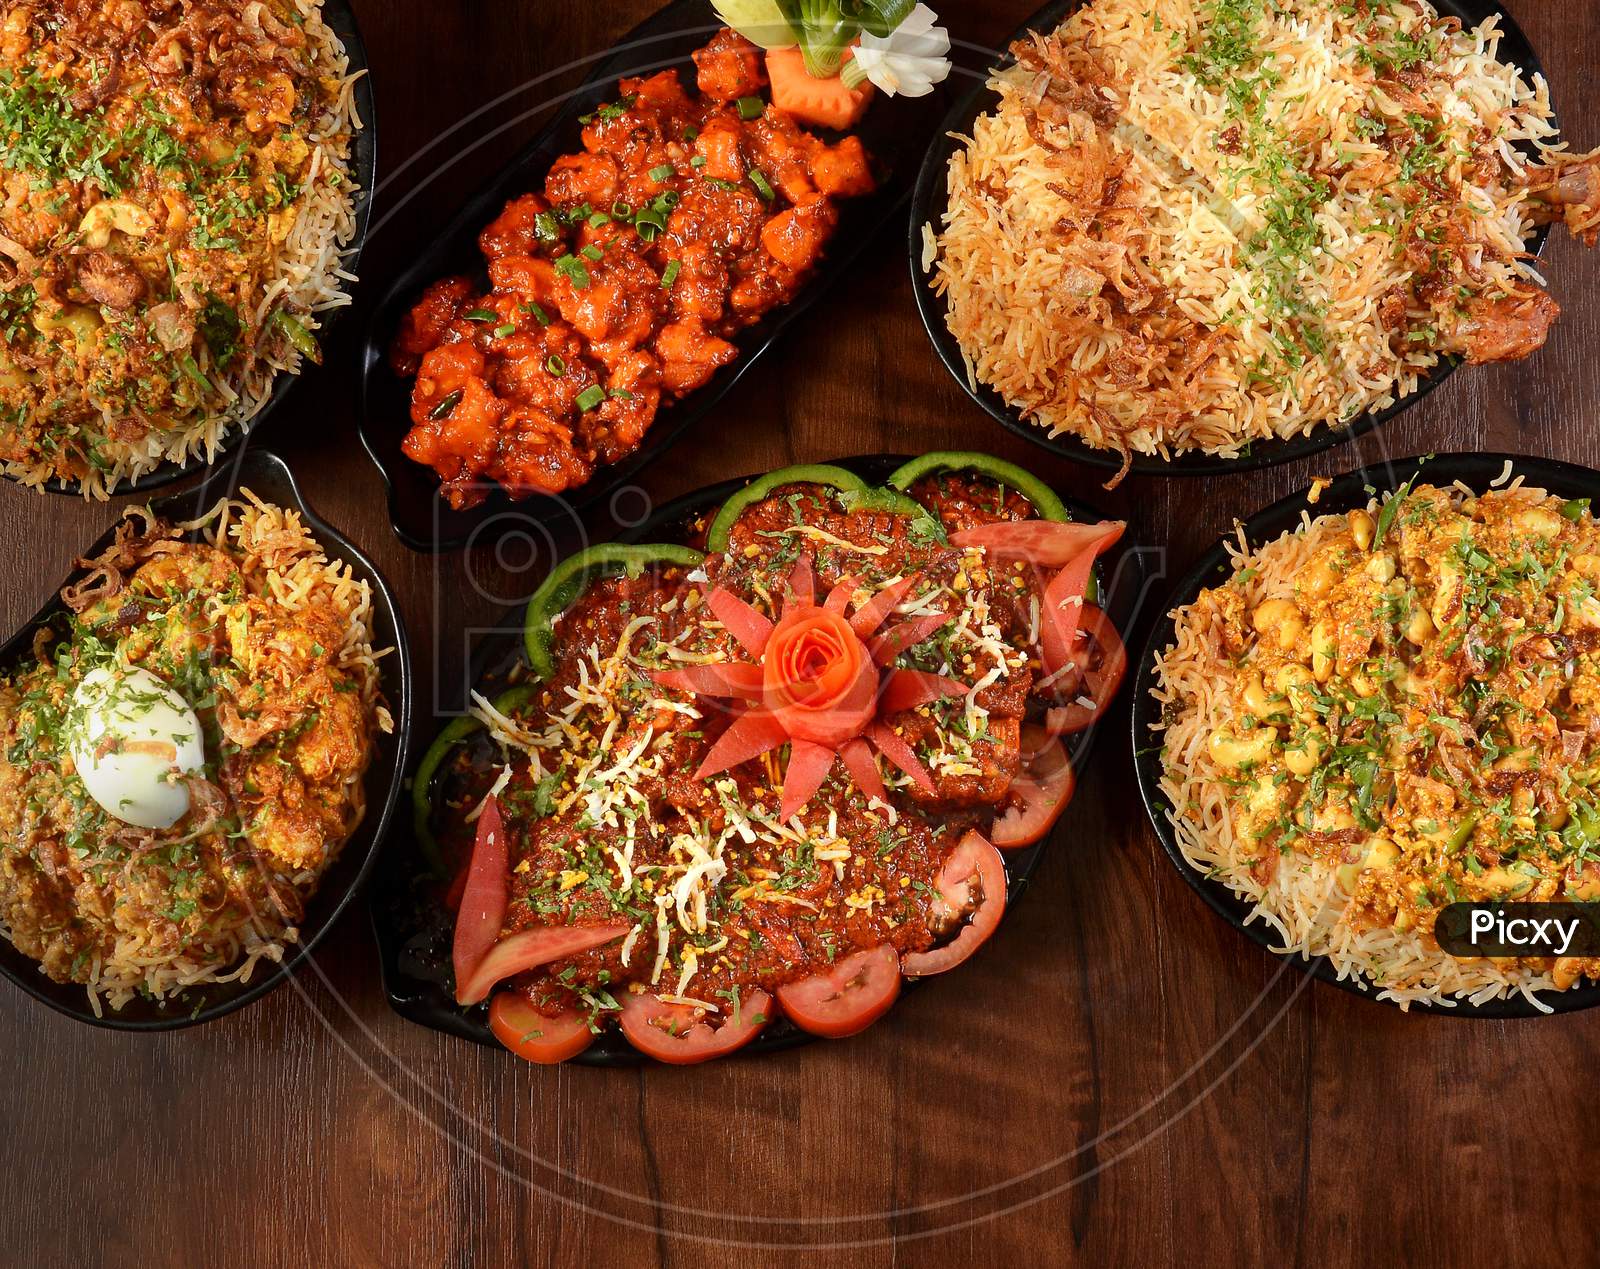 Assorted Indian Foods Mughal Chicken Biryani,Chicken Manchurian,Kaju Biryani,Chicken Dum Biryani And Egg Biryani On Wooden Background. Dishes And Appetizers Of Indian Cuisine